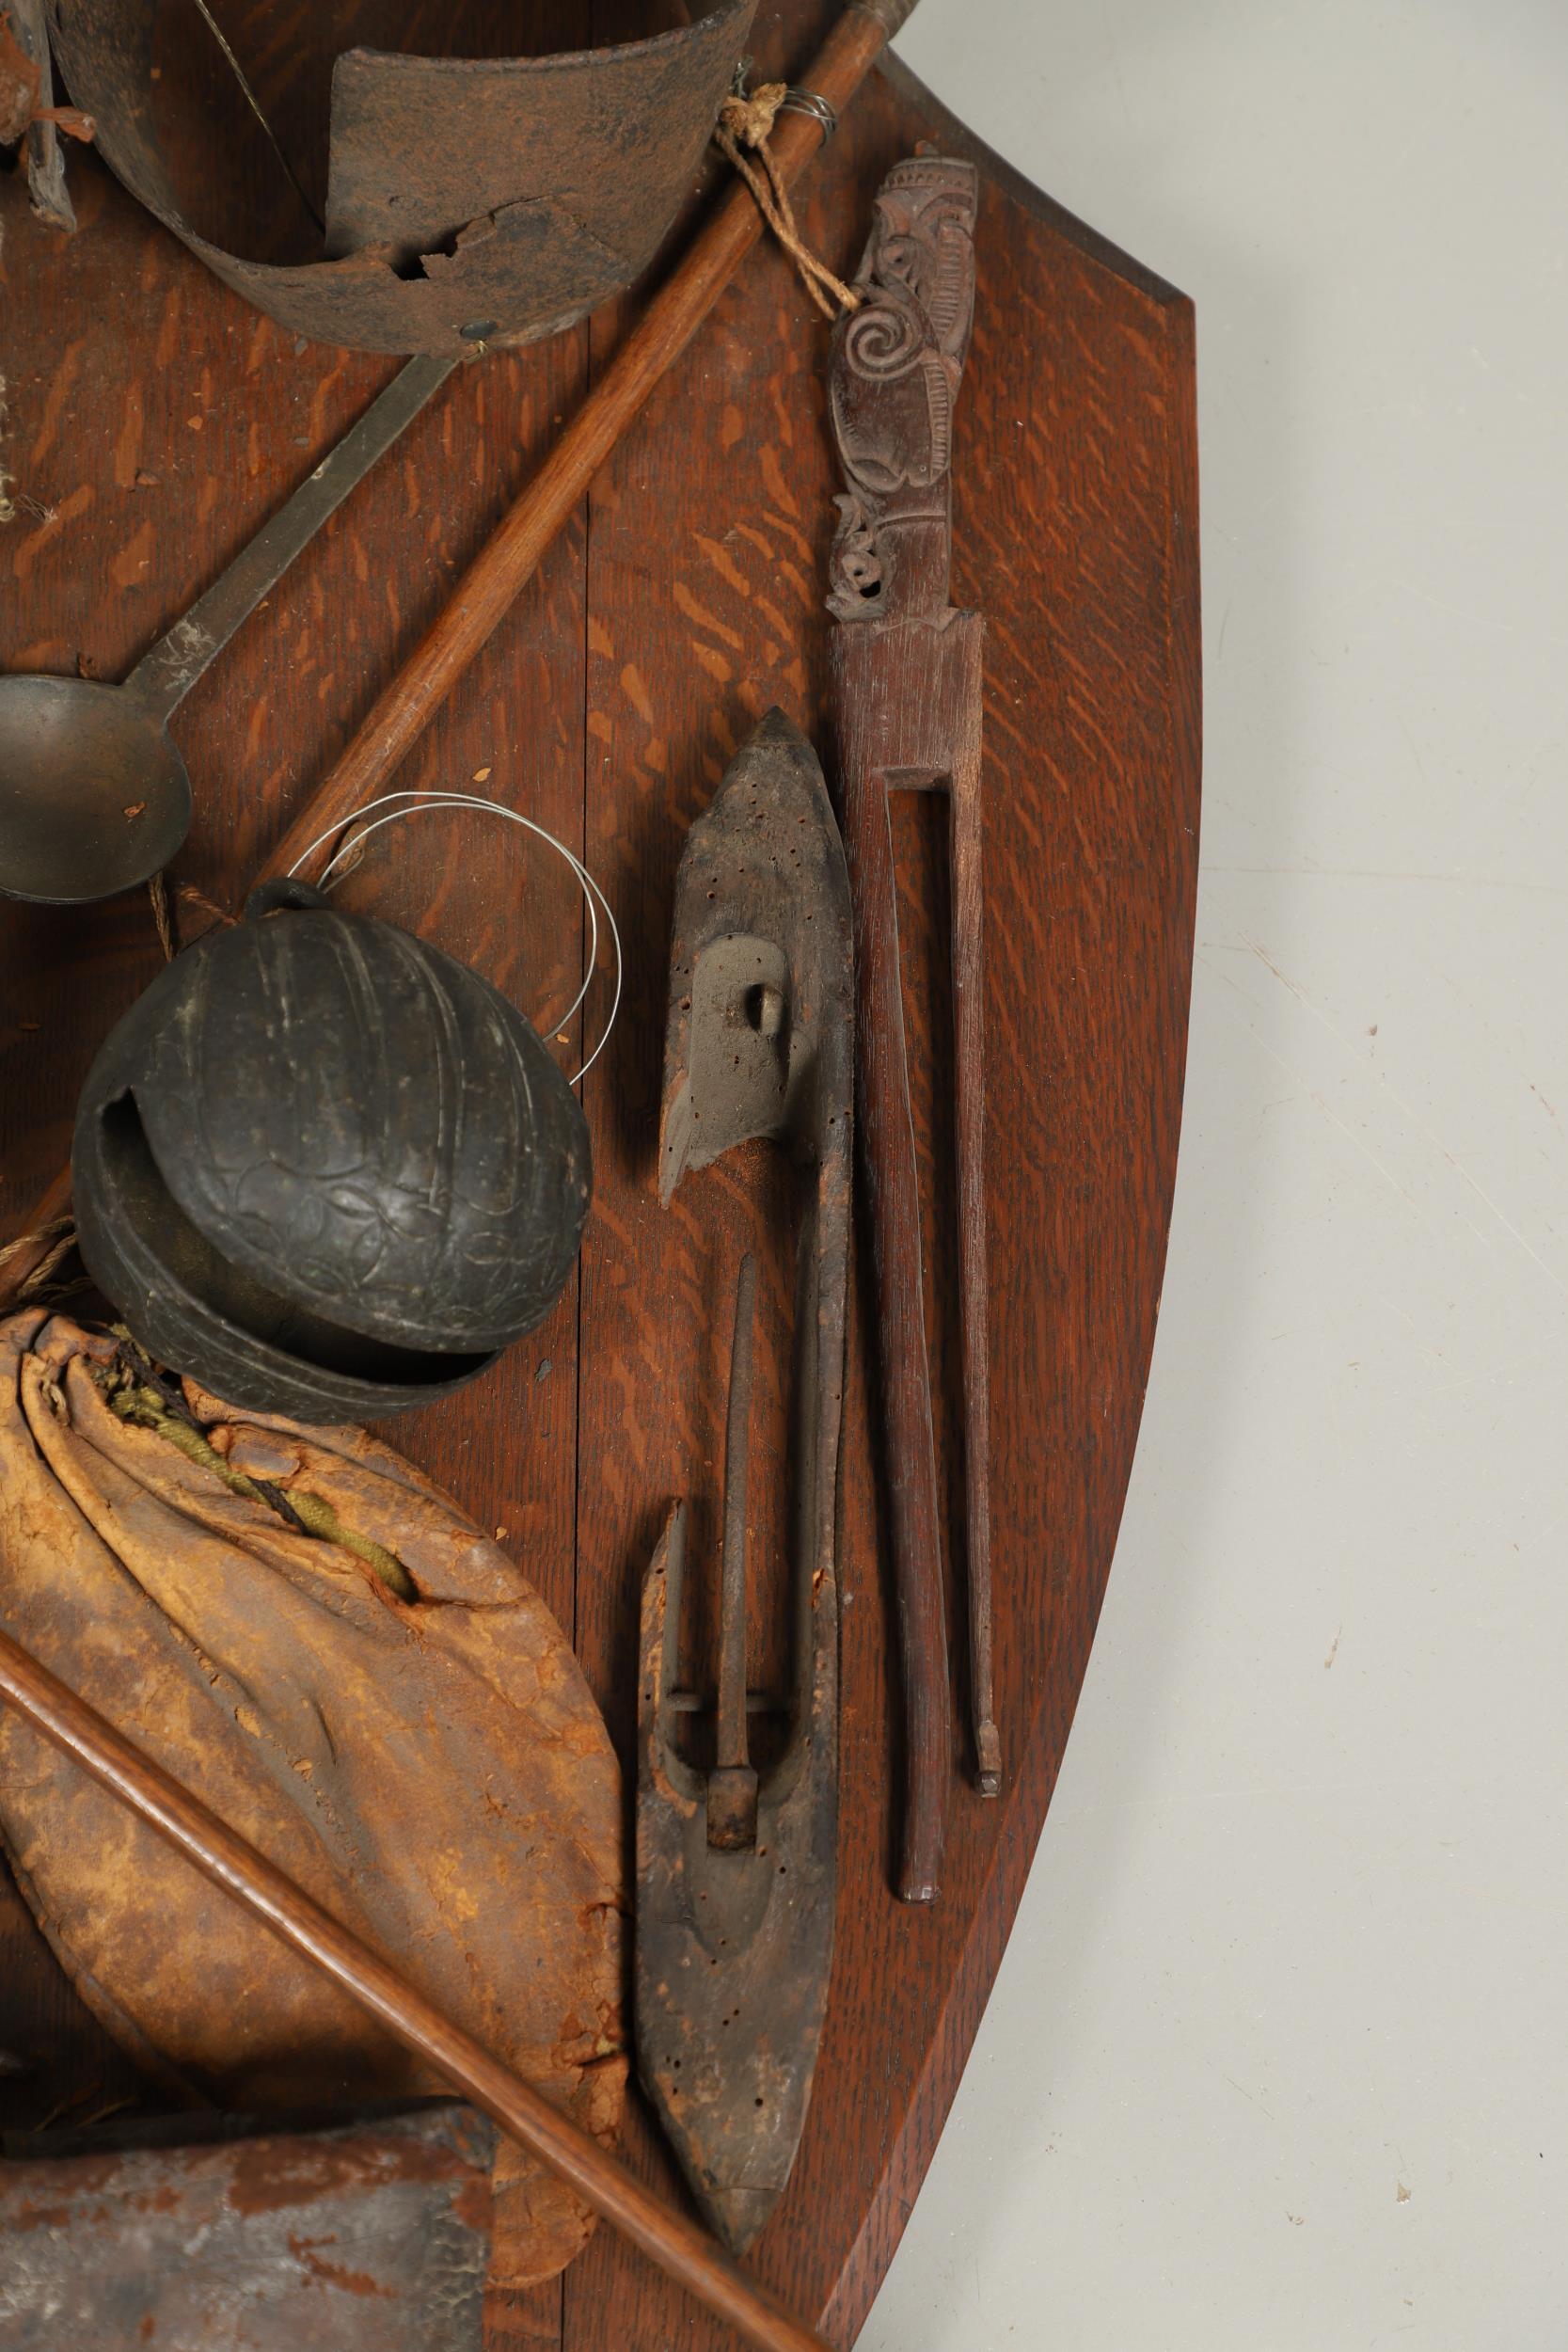 AN UNUSUAL OAK SHIELD MOUNTED WITH MILITARY TROPHIES, CURIOSITIES AND OTHER ITEMS. - Image 11 of 15